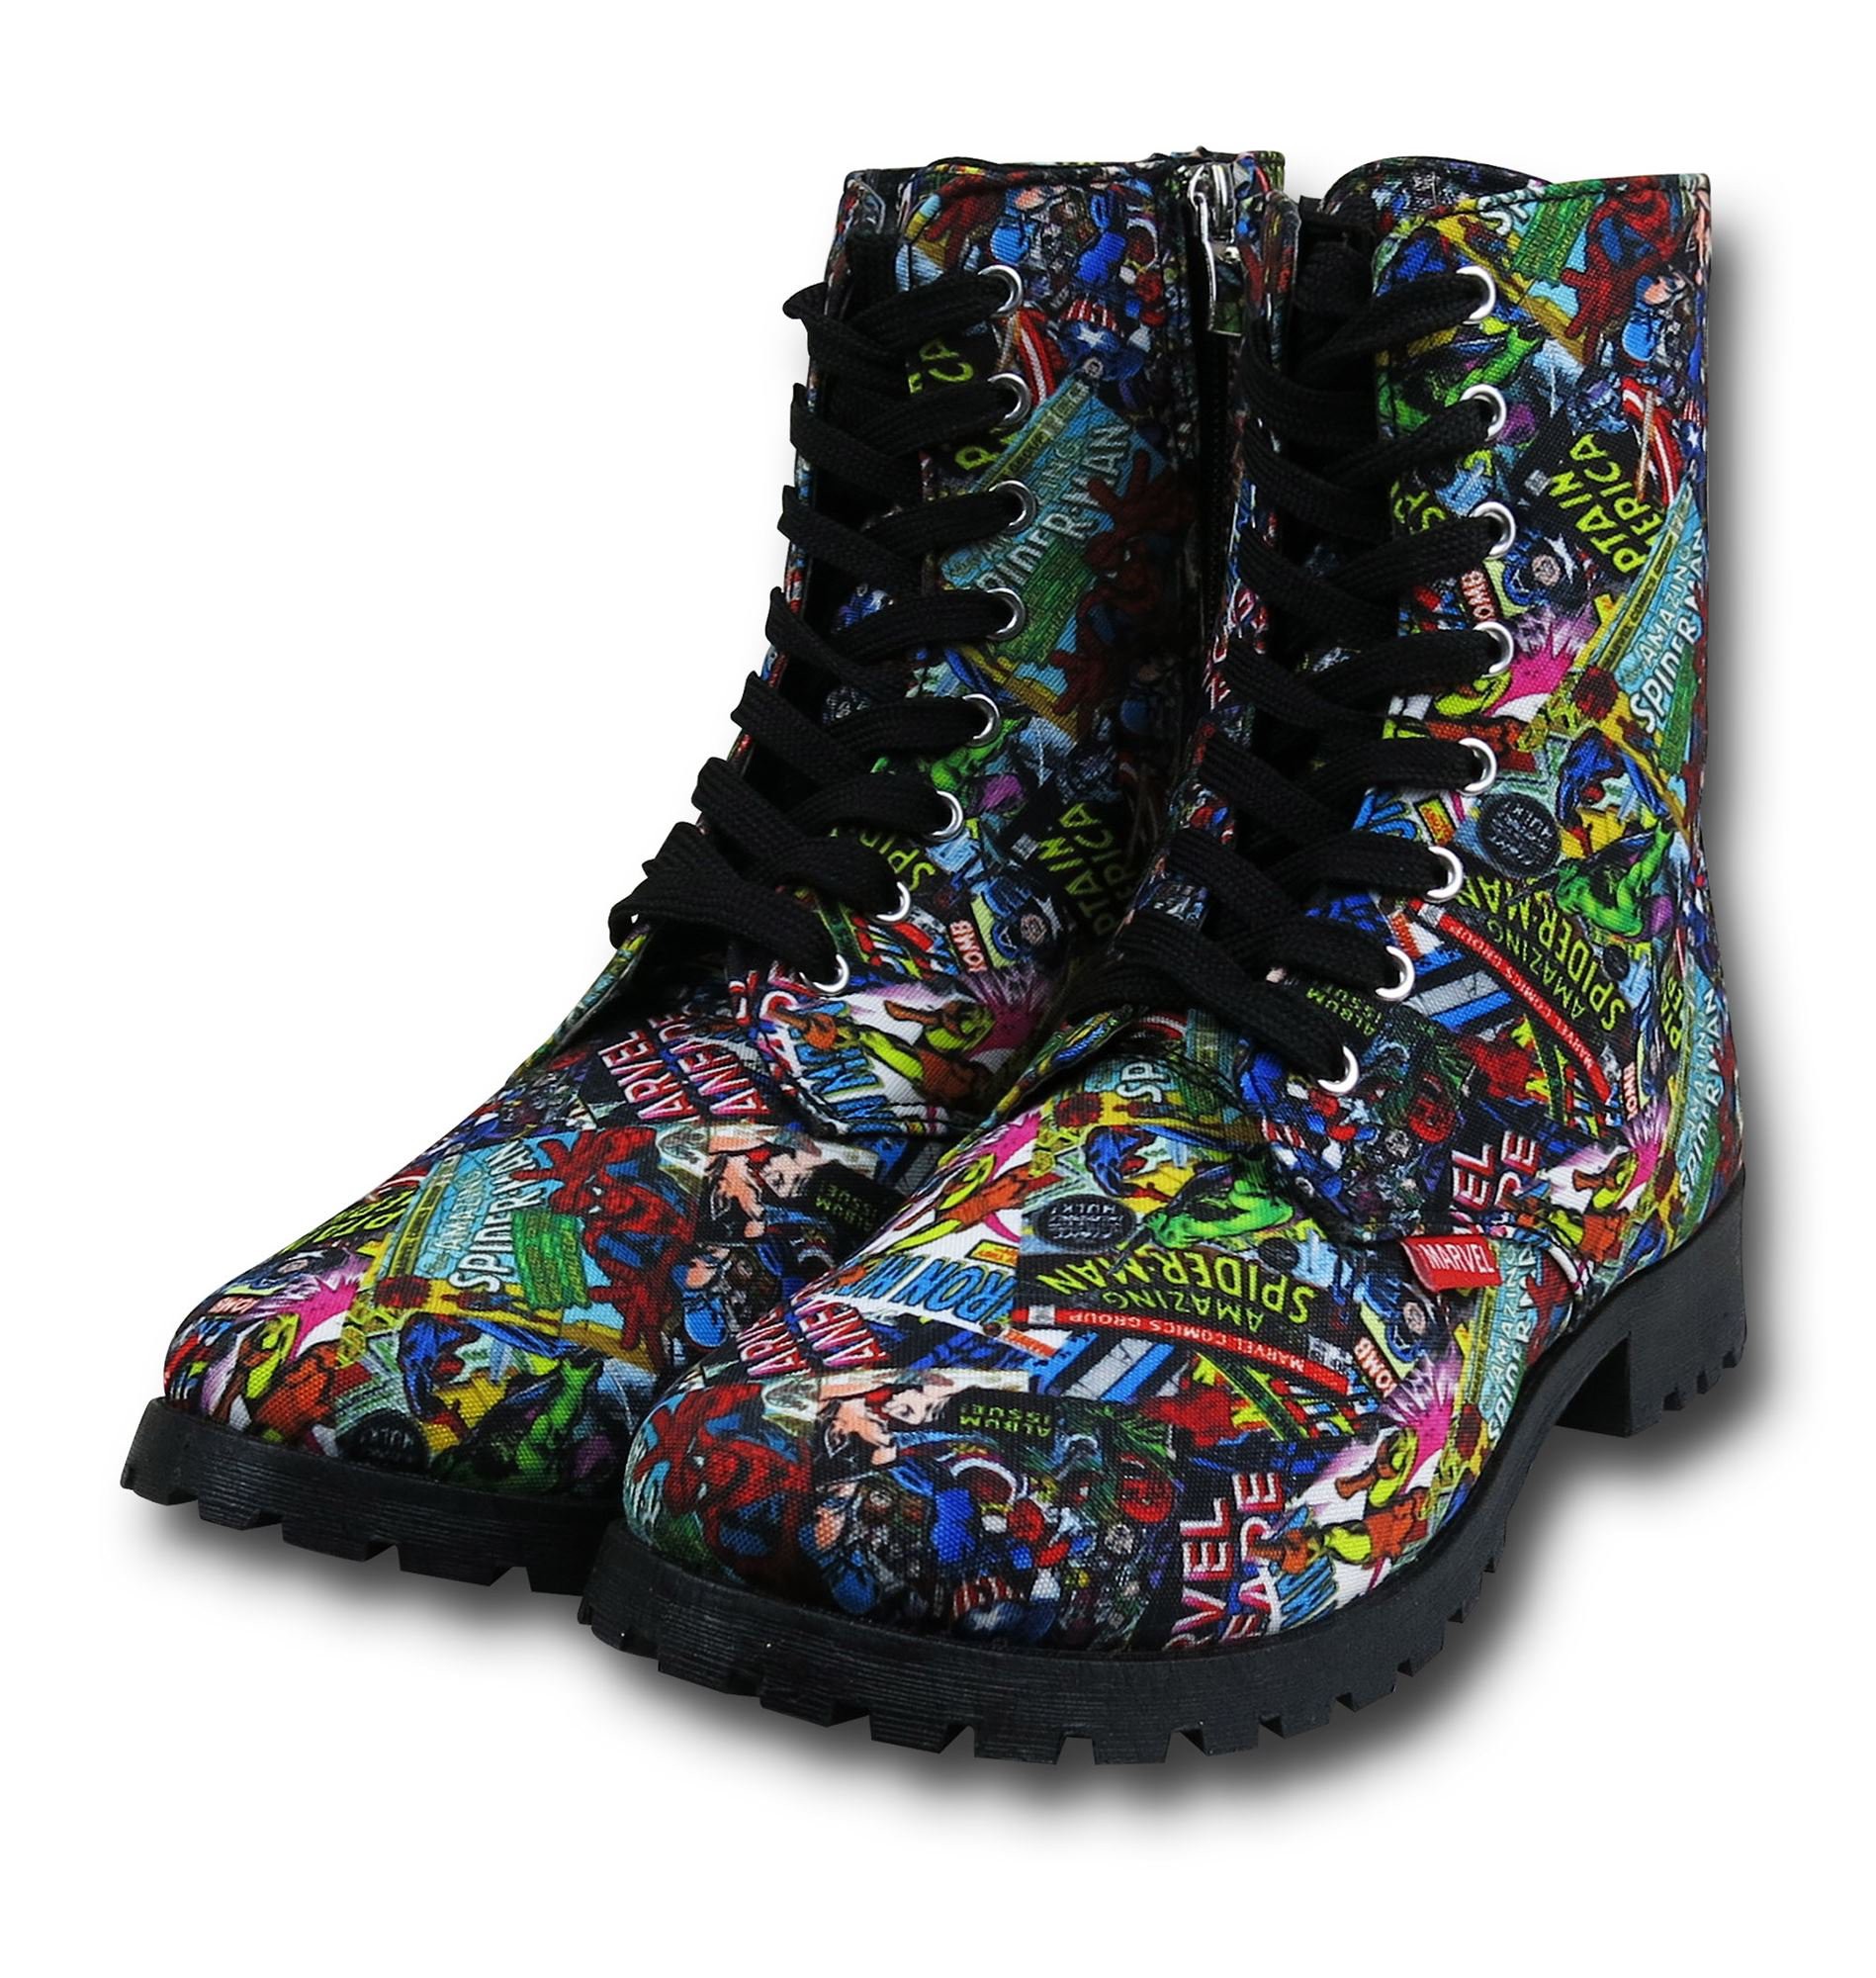 boots marvel